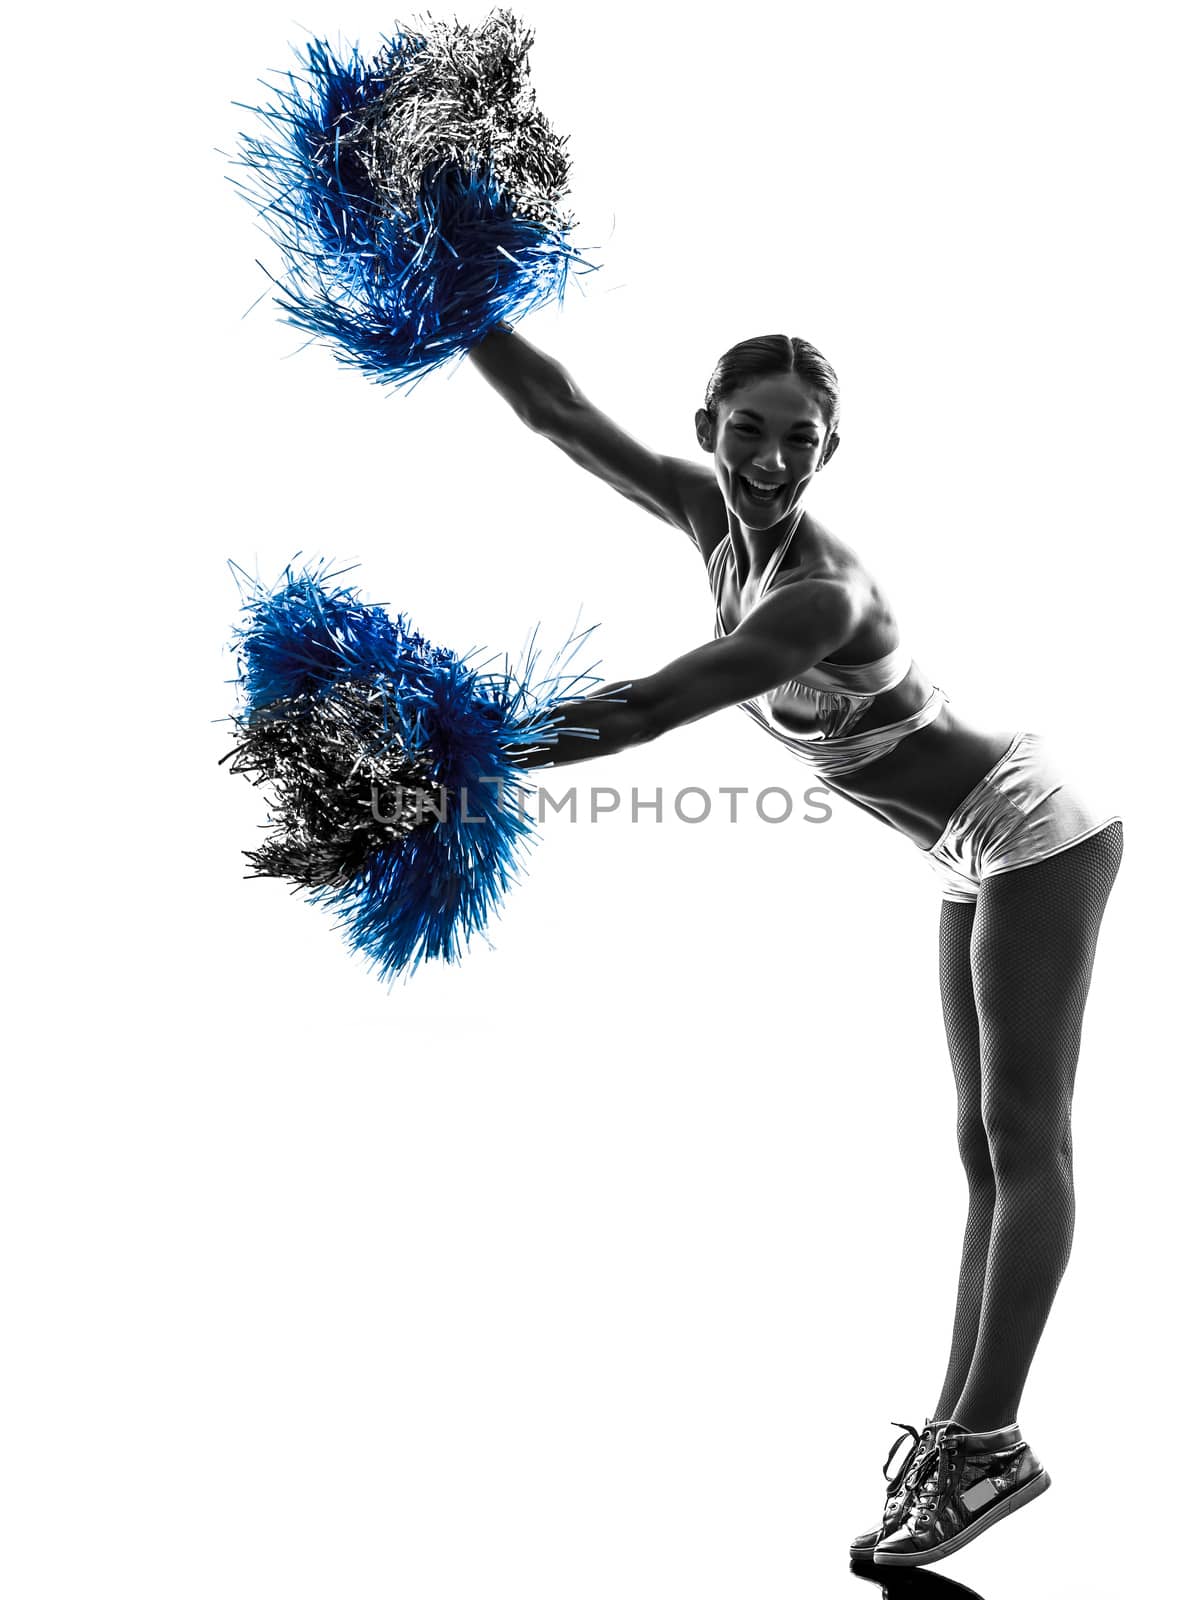 one young woman cheerleader cheerleading  silhouette studio on white background